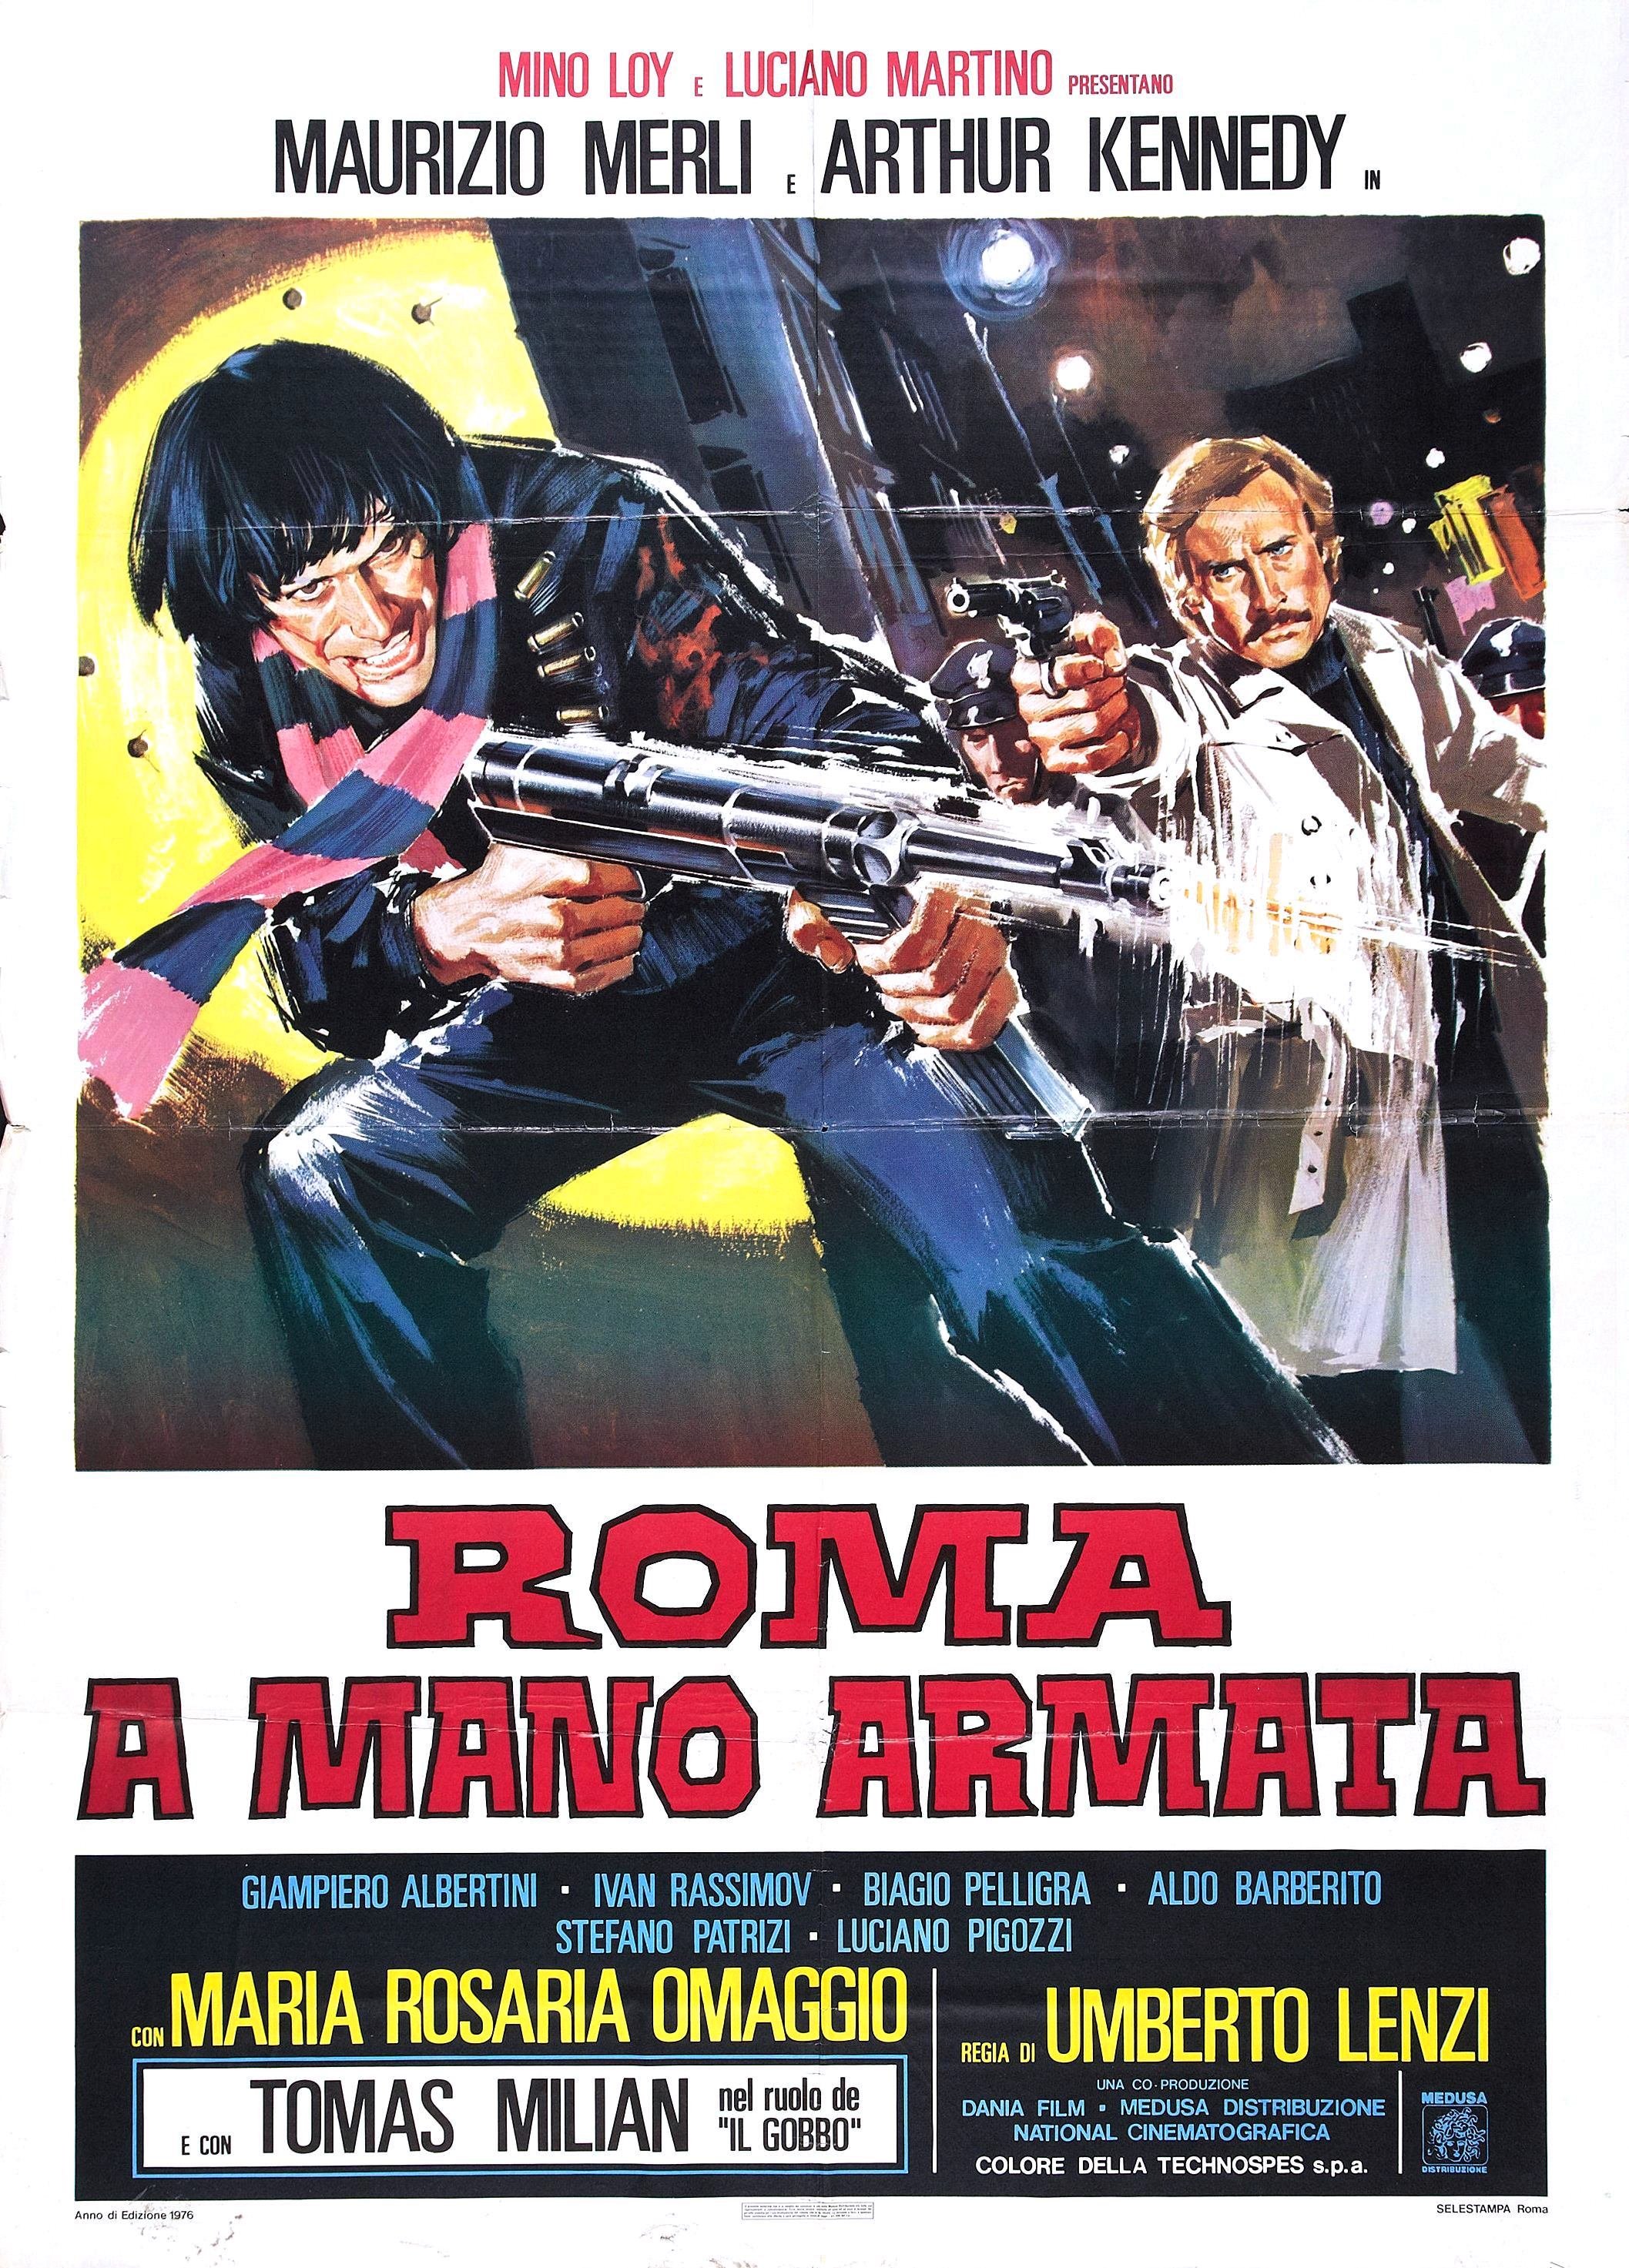 Italian poster of the movie The Tough Ones